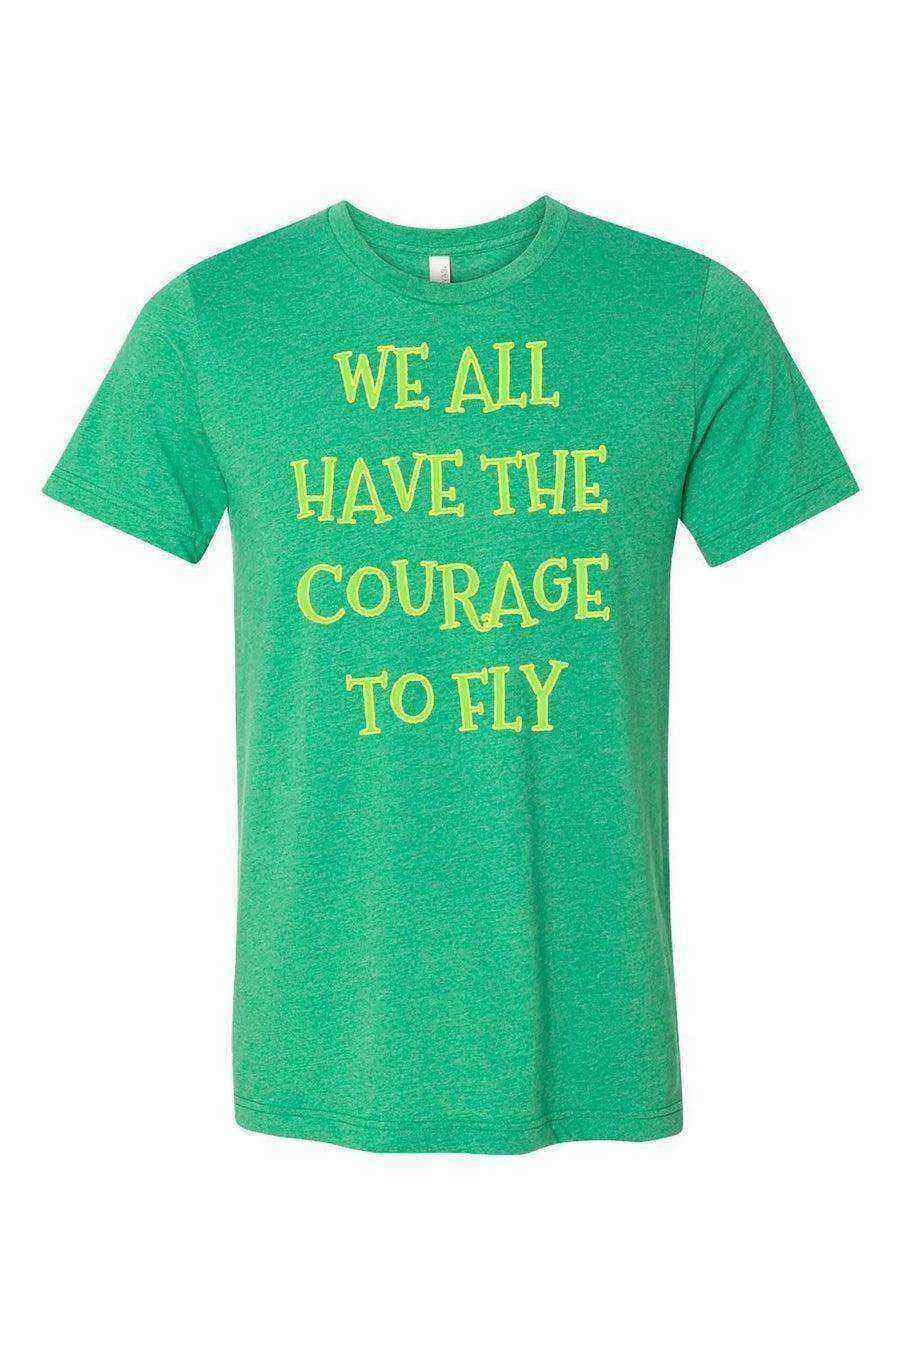 Toddler | We All Have The Courage To Fly Shirt | Happily Ever After Shirt - Dylan's Tees